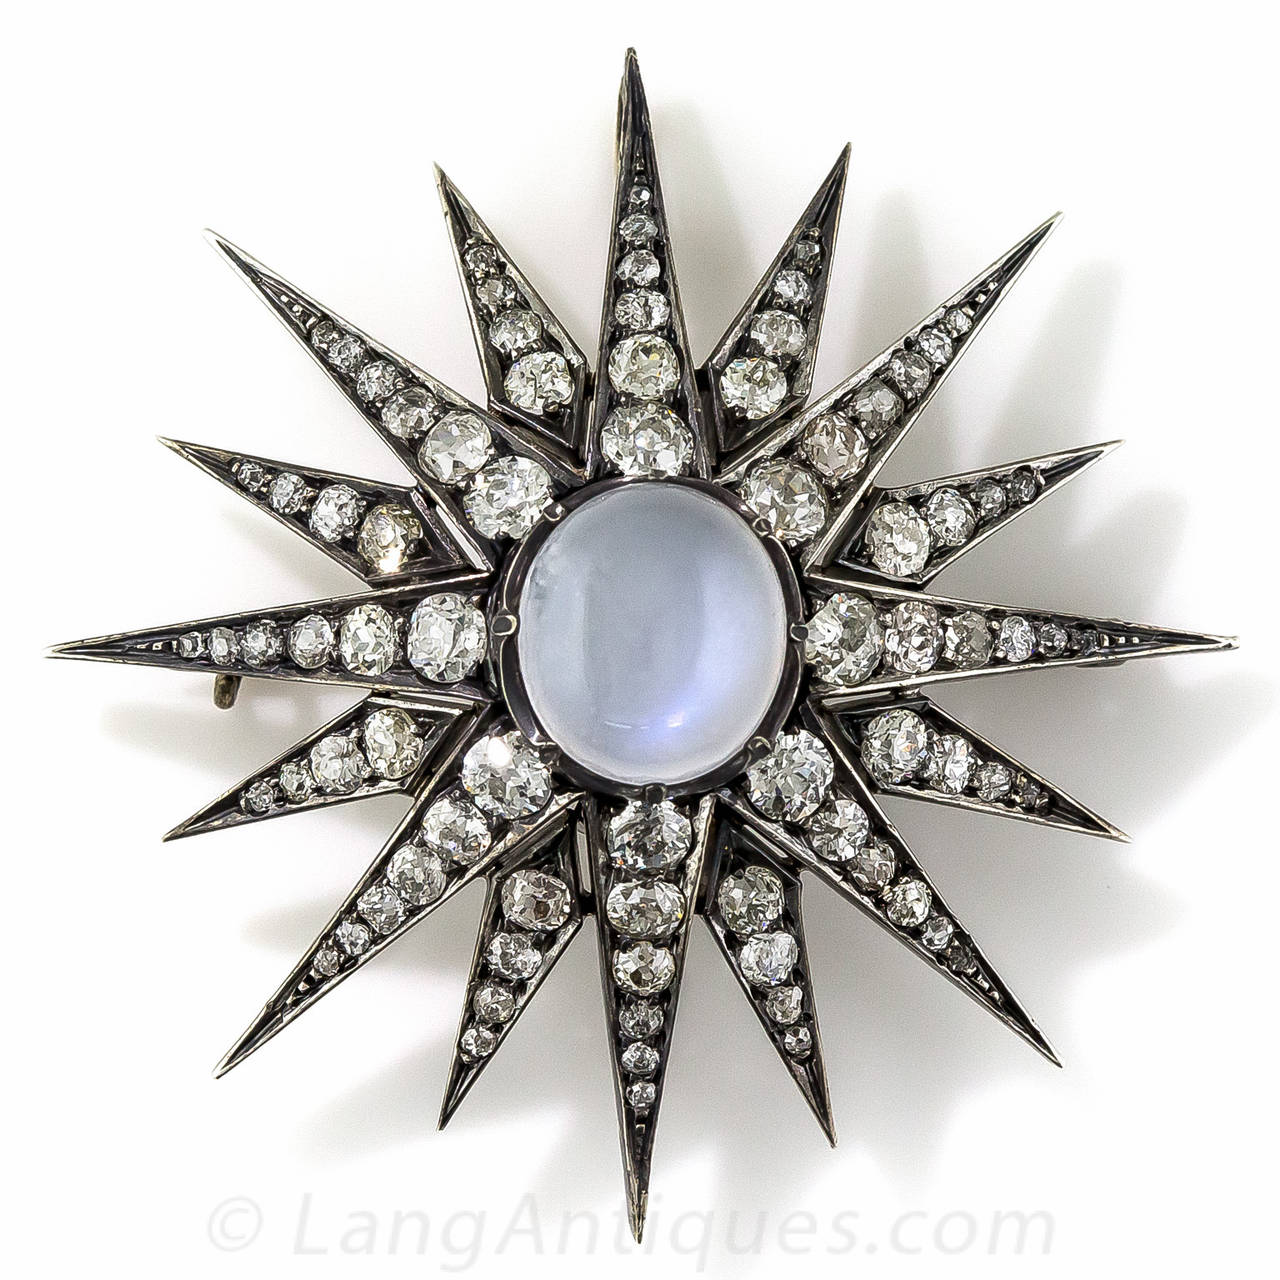 Why settle for just one when you can have both the moon and the stars?! This celestial Victorian jewel, measuring just over 2 inches across, centers on a shimmering blue flash moonstone from which radiates 16 rays, packed to the hilt with 5 carats